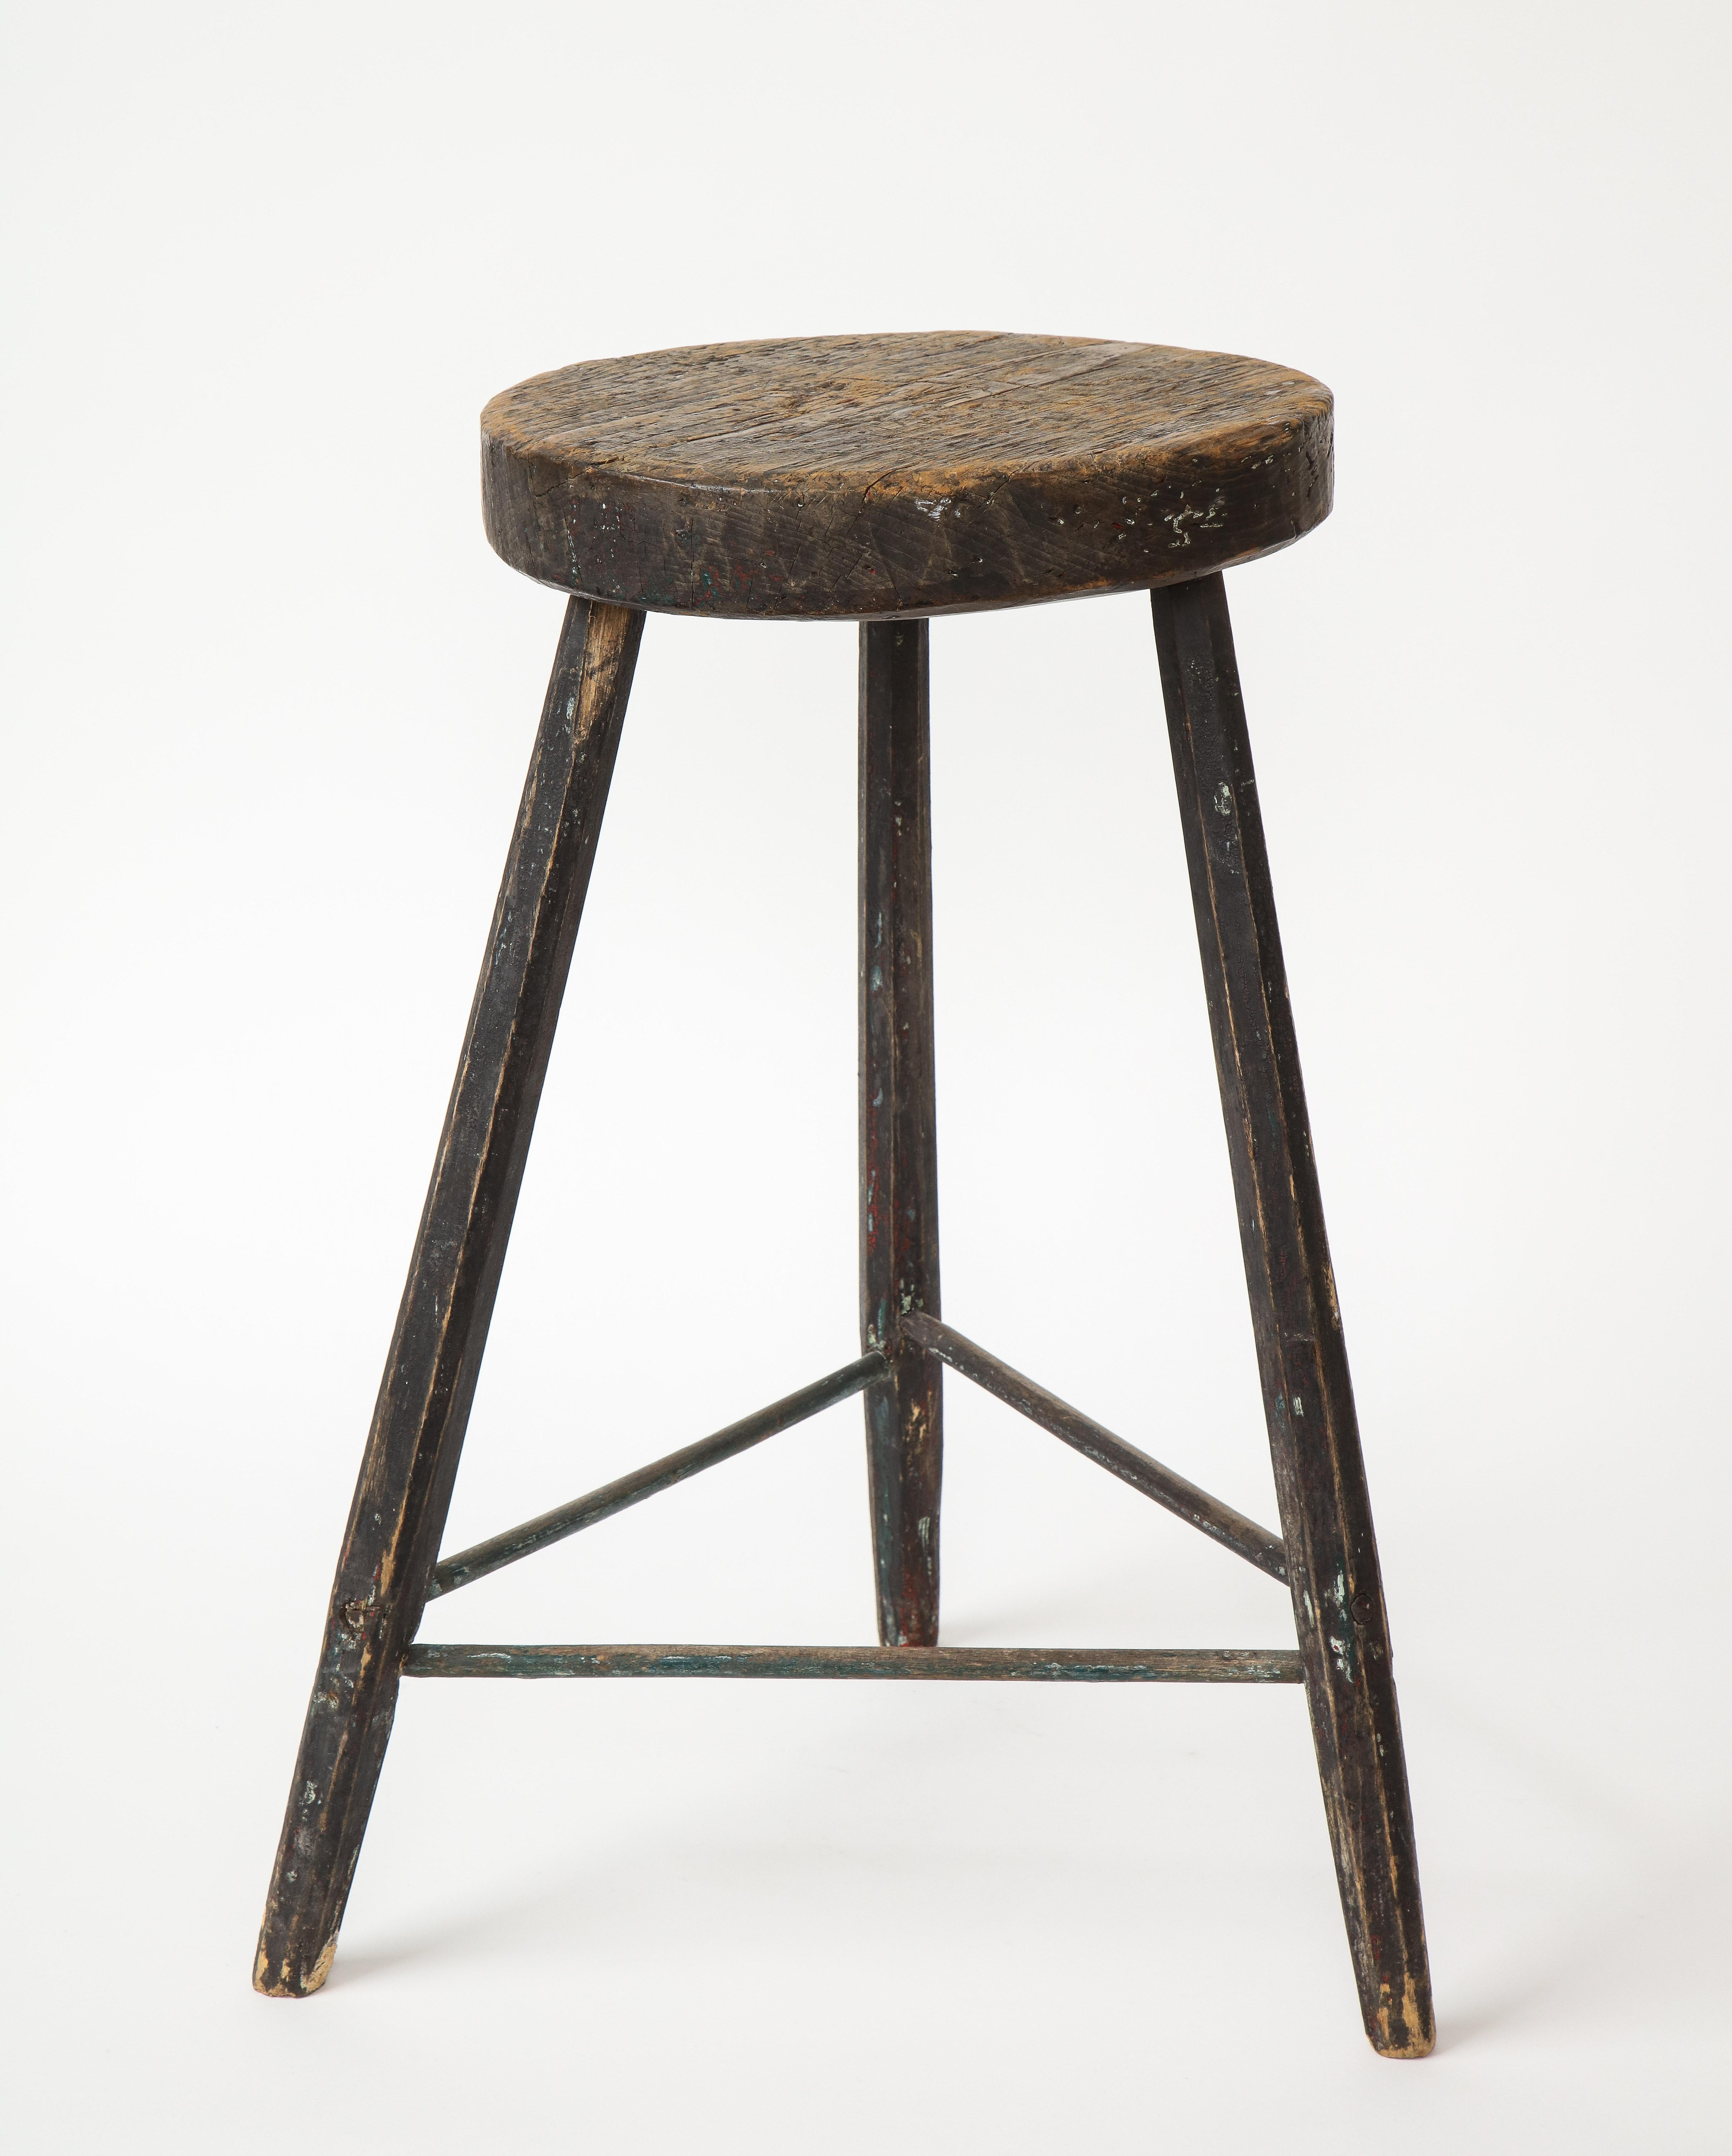 20th Century Vintage Black Tripod Stool with Rustic Wood Top